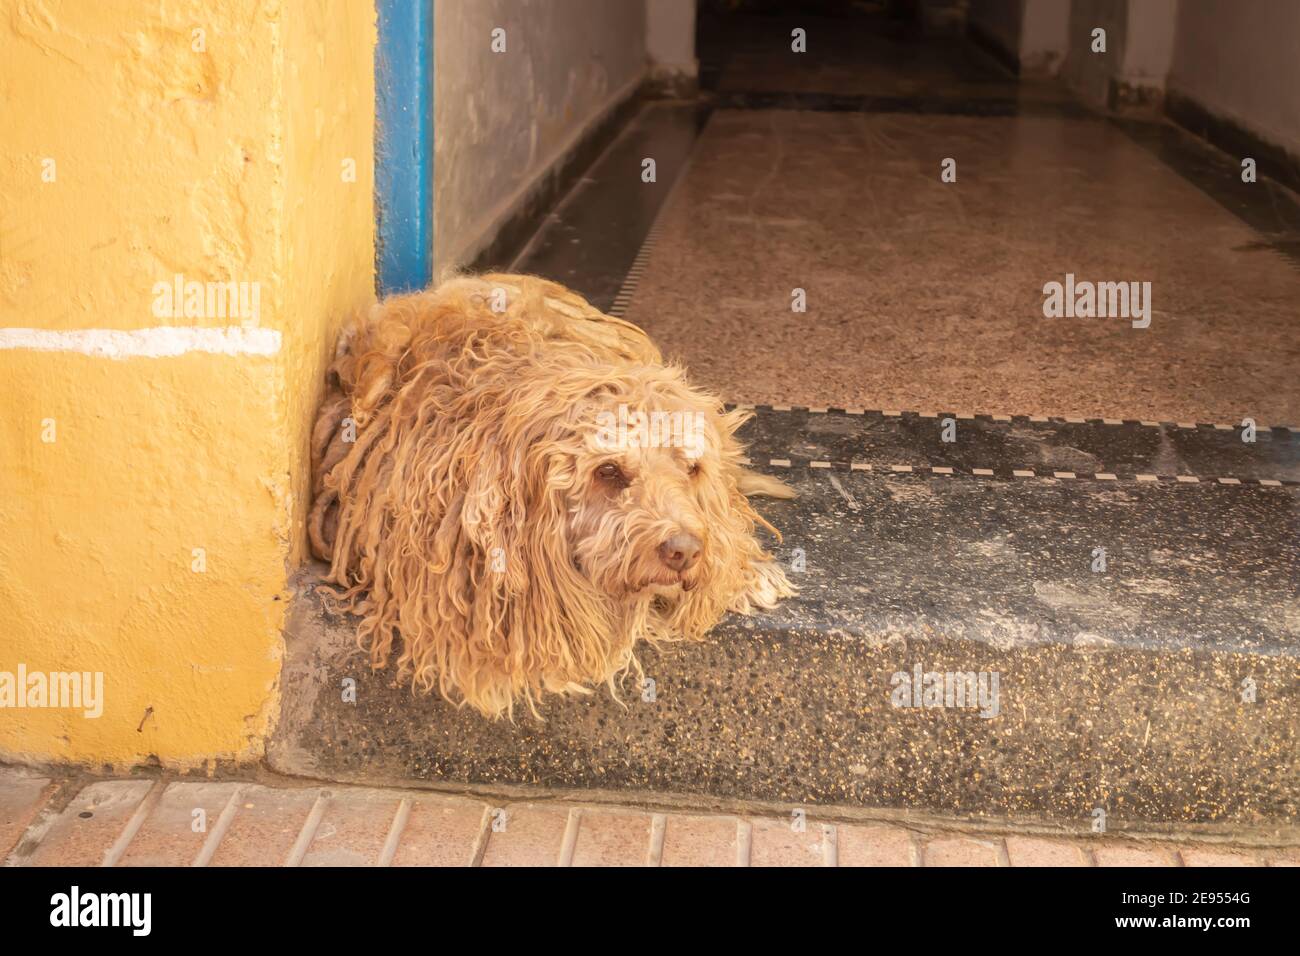 Dog with long fur waiting at the entrance of the house in Morocco Stock Photo